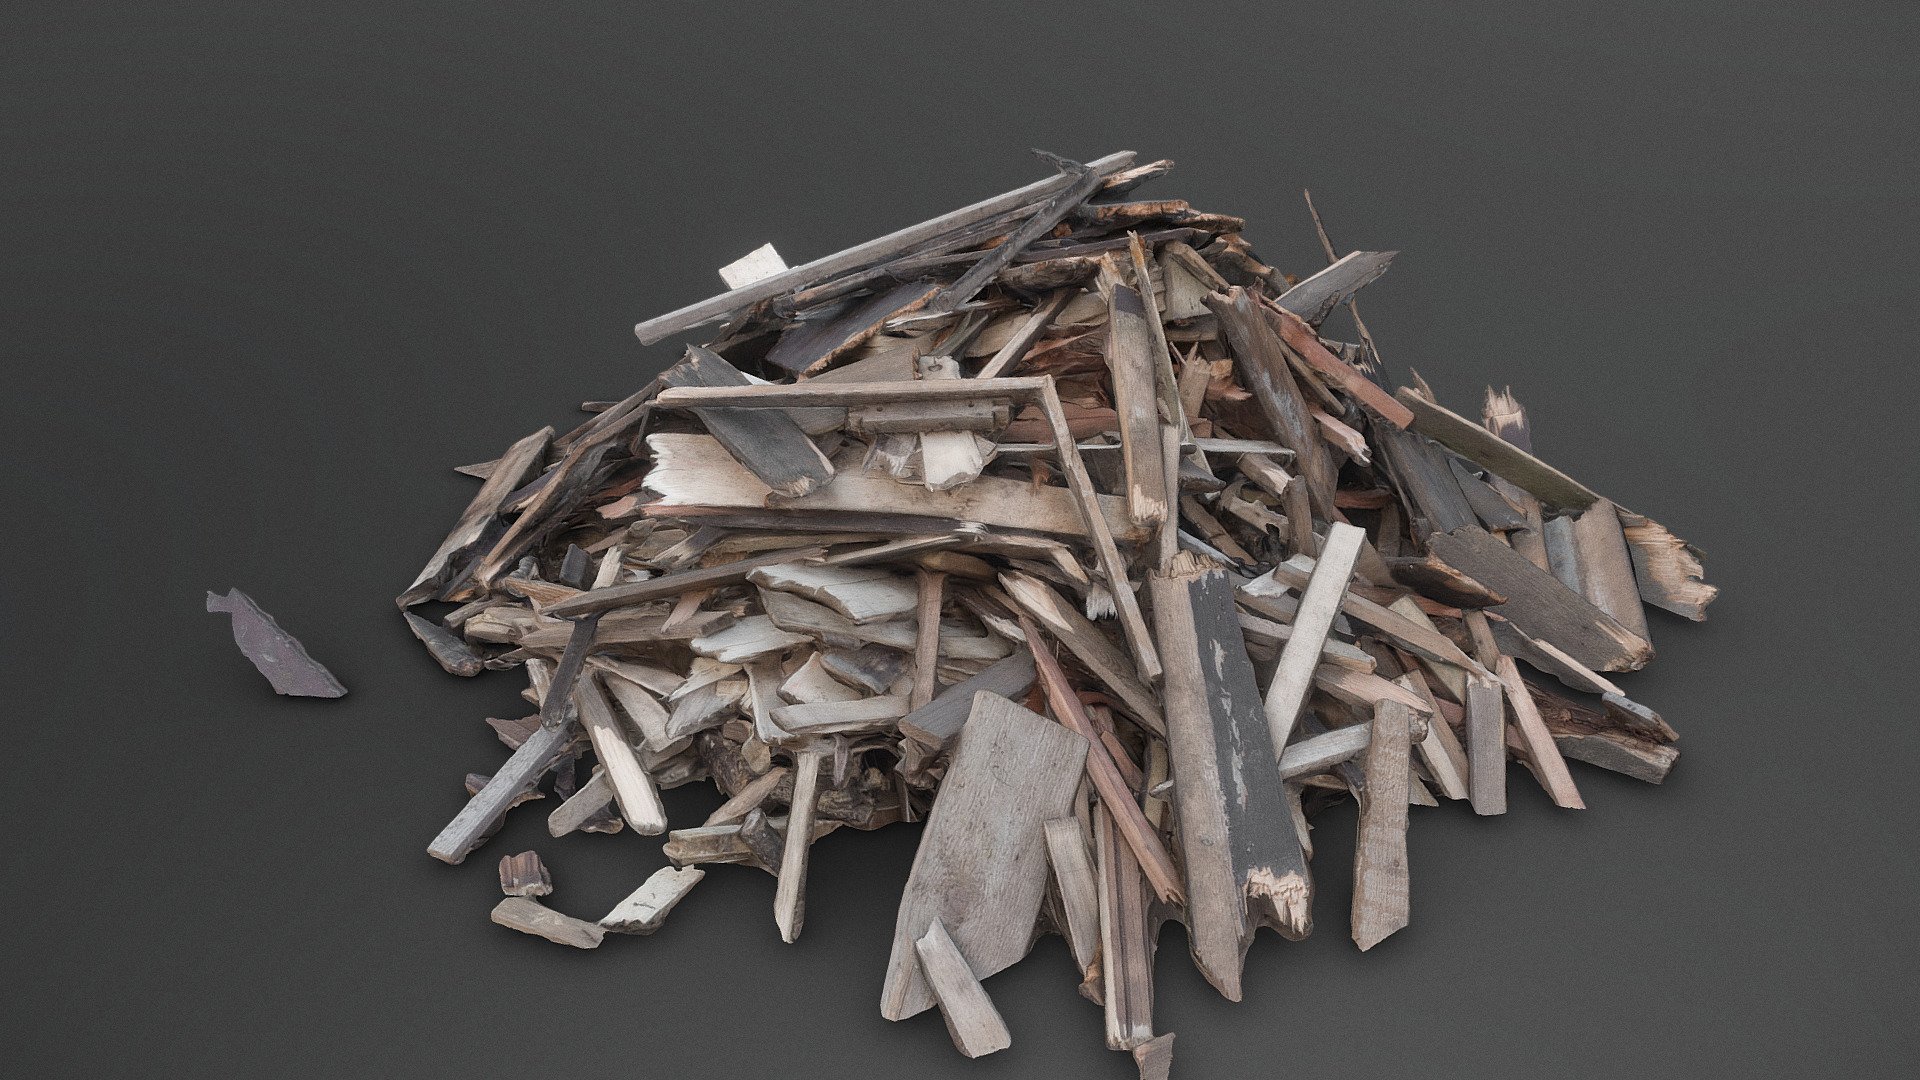 Waste construction wood lumber debris from appartment reconstruction building work, construction demolition ruin house wall board junk pieces, destroyed shredded furniture

test cellphone photogrammetry scan (150x12MP), 3x8K textures - Waste construction lumber - Download Free 3D model by matousekfoto 3d model